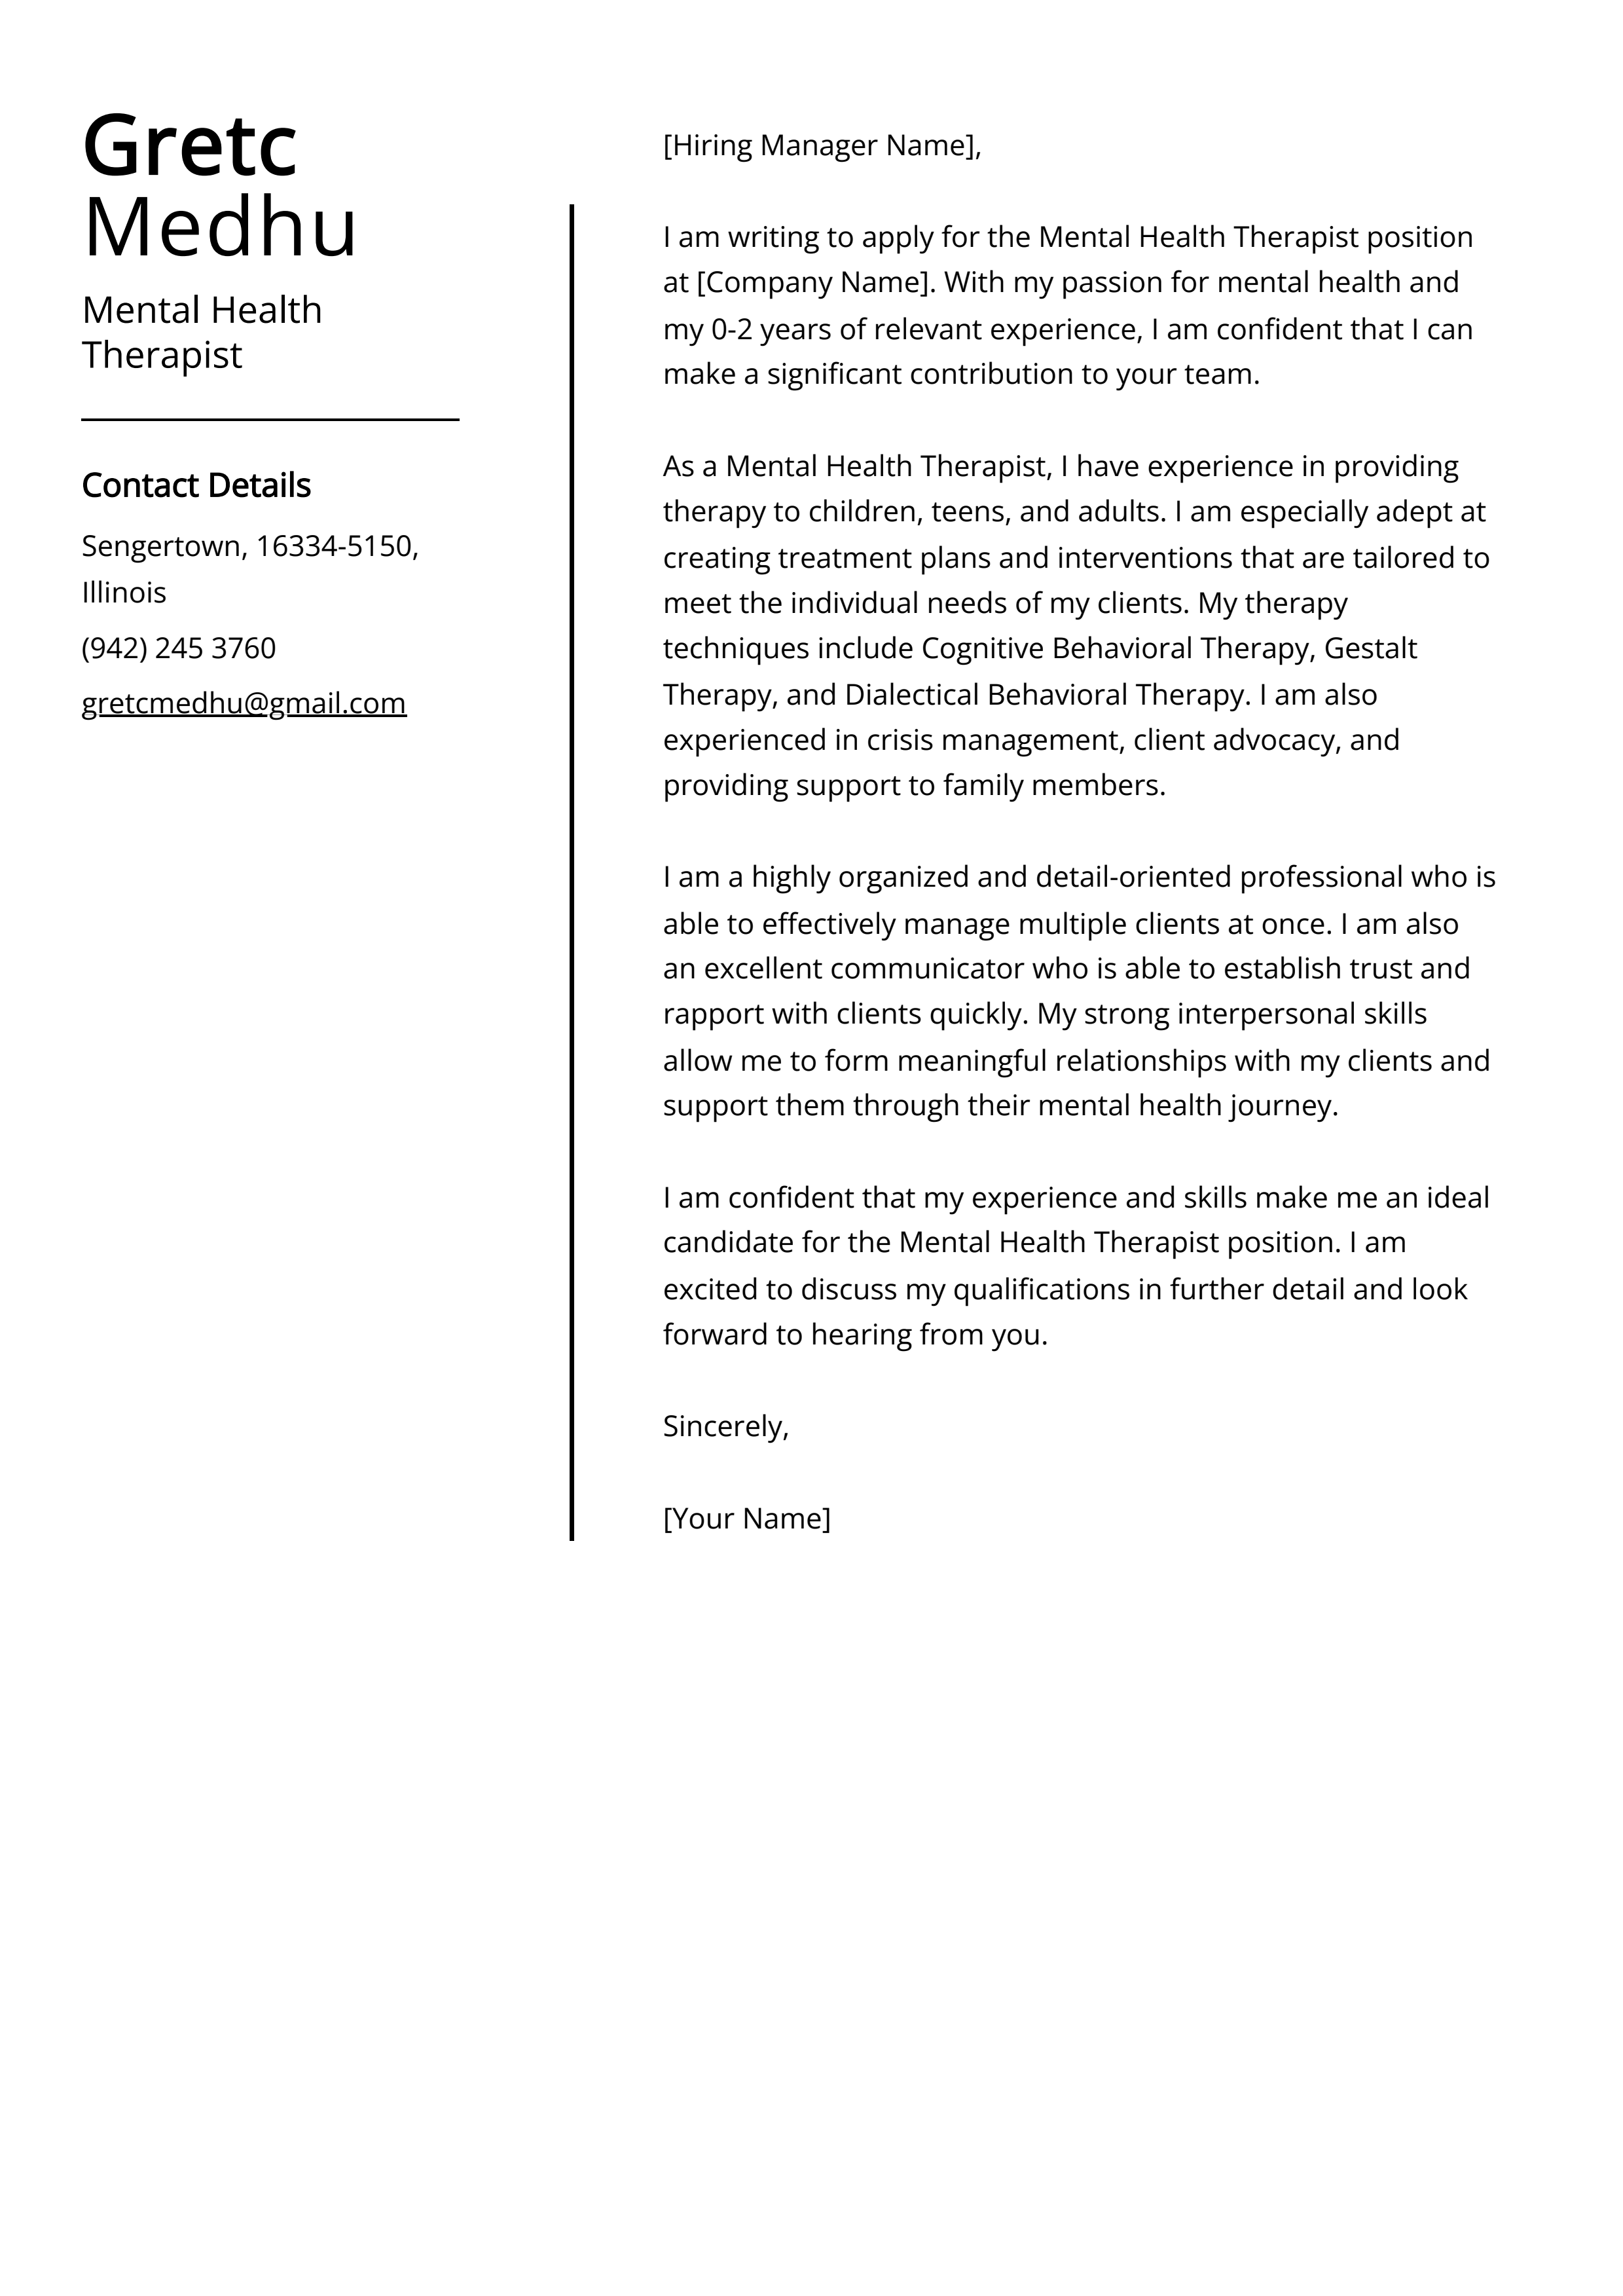 Mental Health Therapist Cover Letter Example